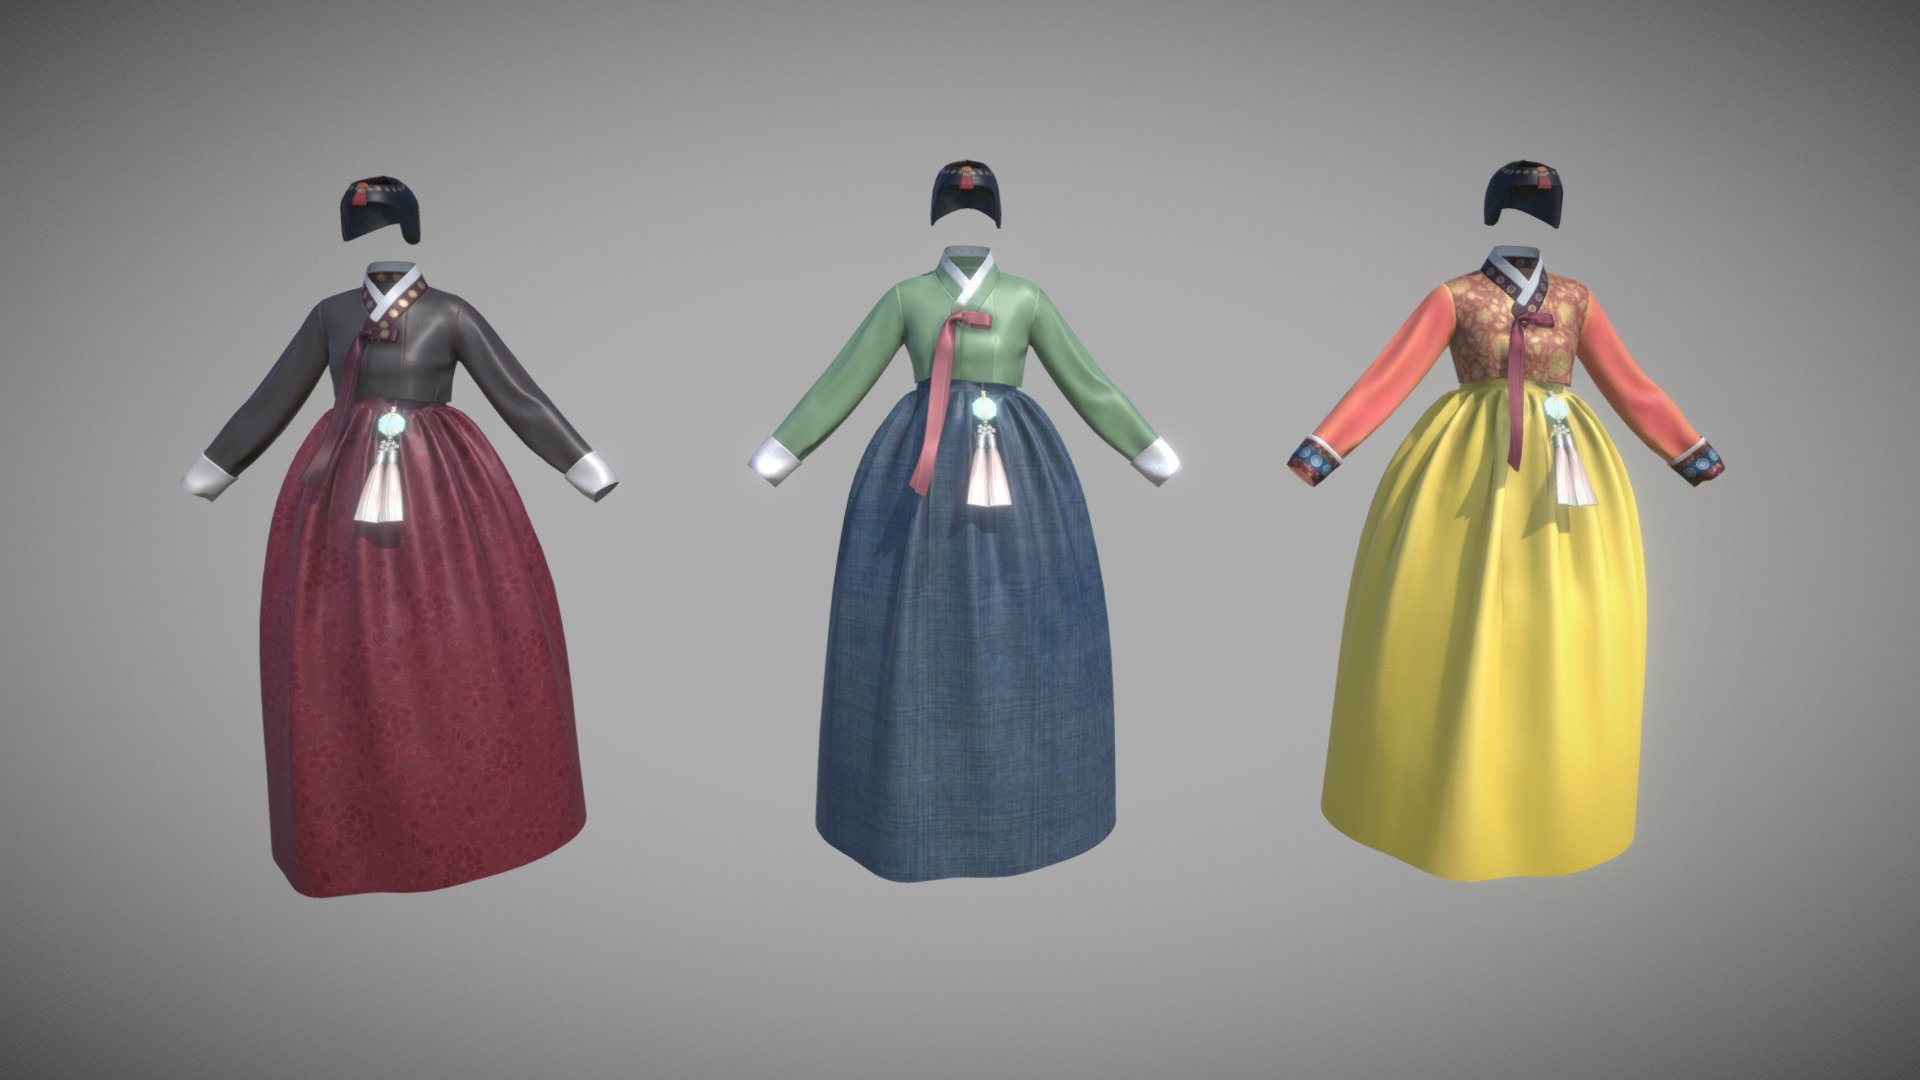 This model is GAME READY for Unity

File Formats:

3ds Max 2019 FBX (Multi Format)

Model: The Hanbok is modeled on a real scale.

Geometry count:




18,996 polys ( Clothes : 3,523 / Accessories : 1,274 / Hat :    931 / Shoes : 604    )

36,960 tris     ( Clothes : 6,812 / Accessories : 2,600 / Hat : 1,744 / Shoes : 1,164 )

19,650 verts  ( Clothes : 3,672 / Accessories : 1,357 / Hat :    895 / Shoes : 626    )

Textures: 2048x2048 Albedo, Metallic, Normal Maps

Textures designed for physically based rendering (PBR) Textures in .png format

I have exported specialized texture maps for Unity 3d model